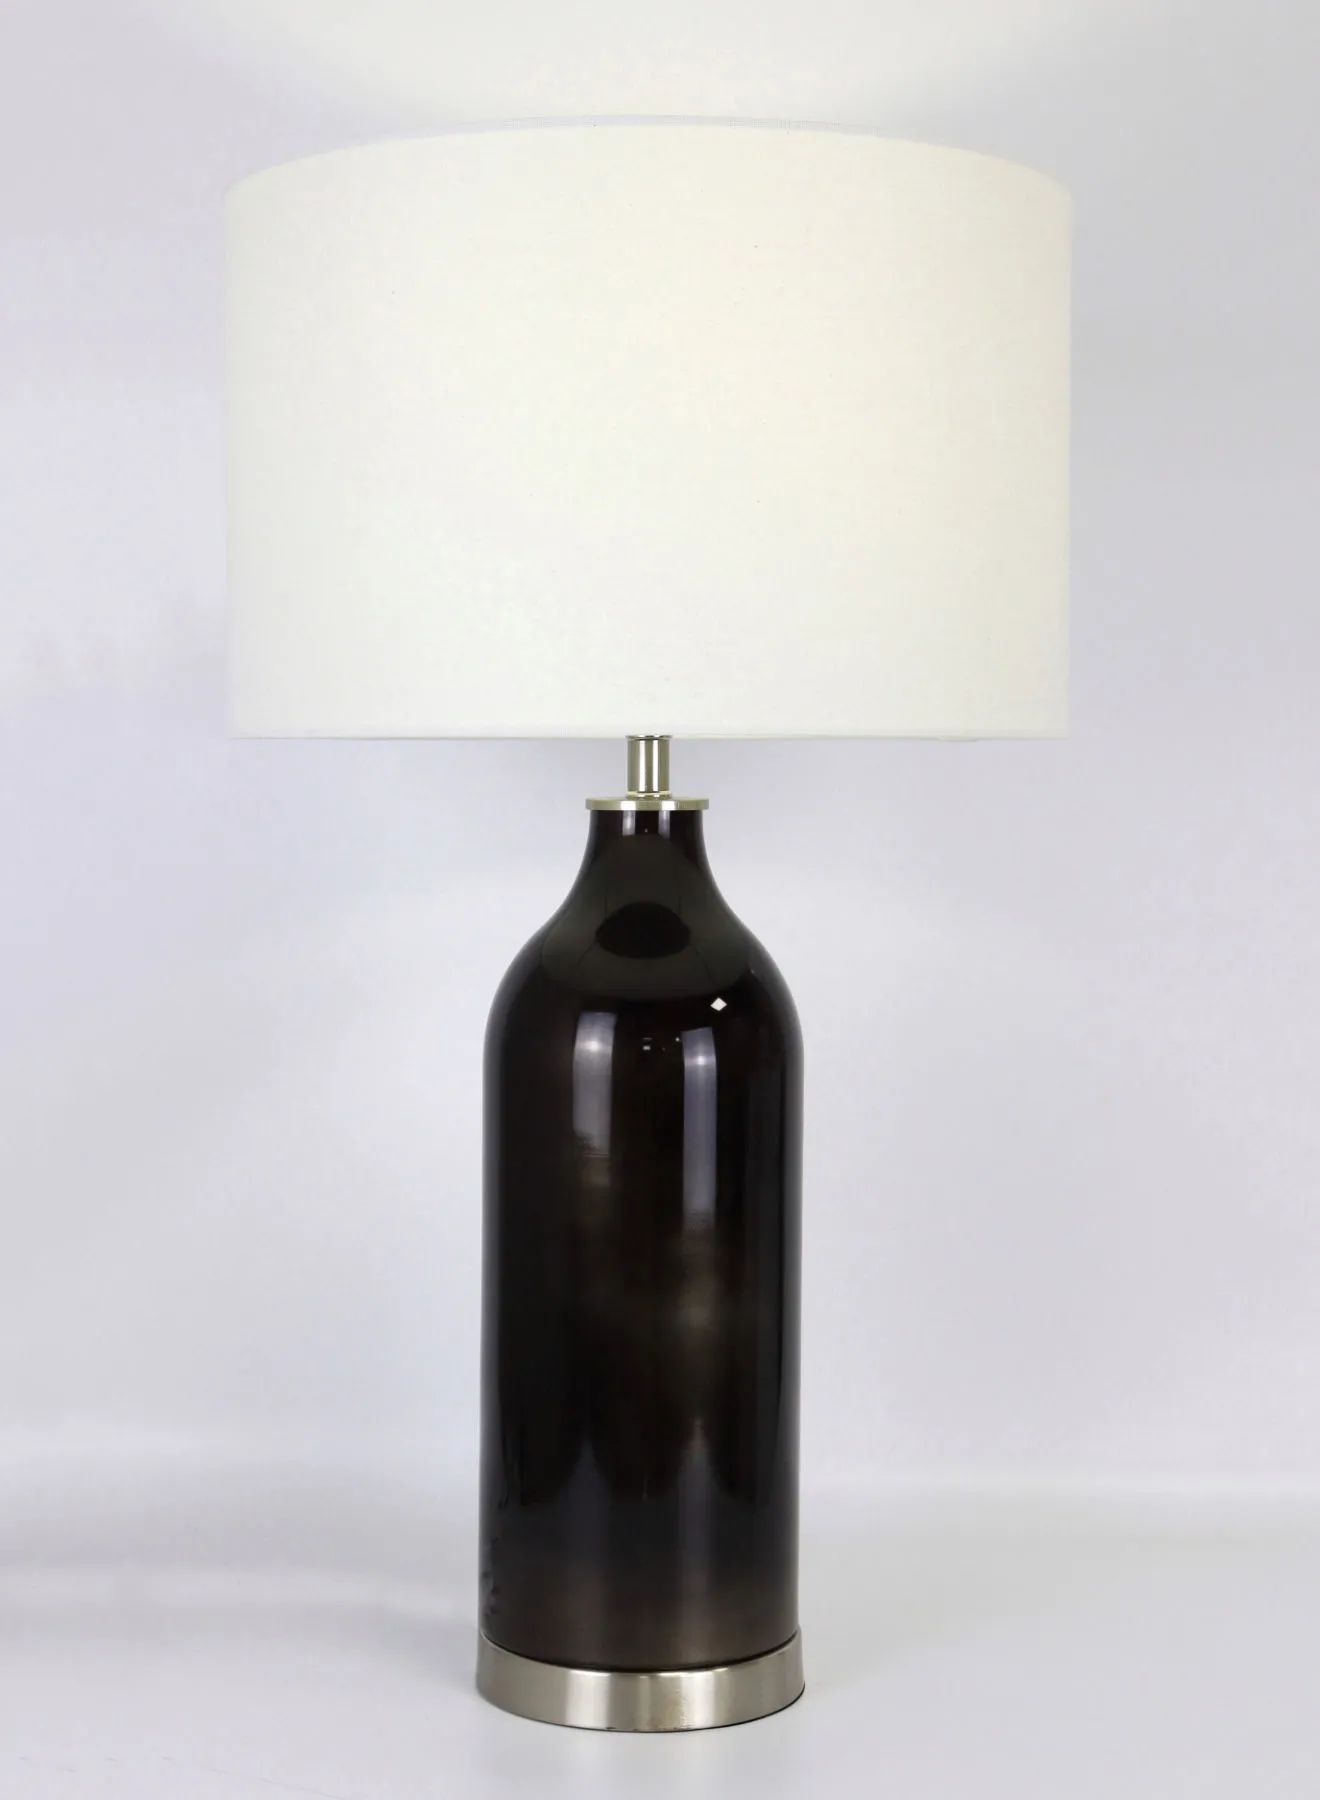 ebb & flow Modern Design Glass Table Lamp Unique Luxury Quality Material for the Perfect Stylish Home RSN71034 Deep Grey 15 x 26.5